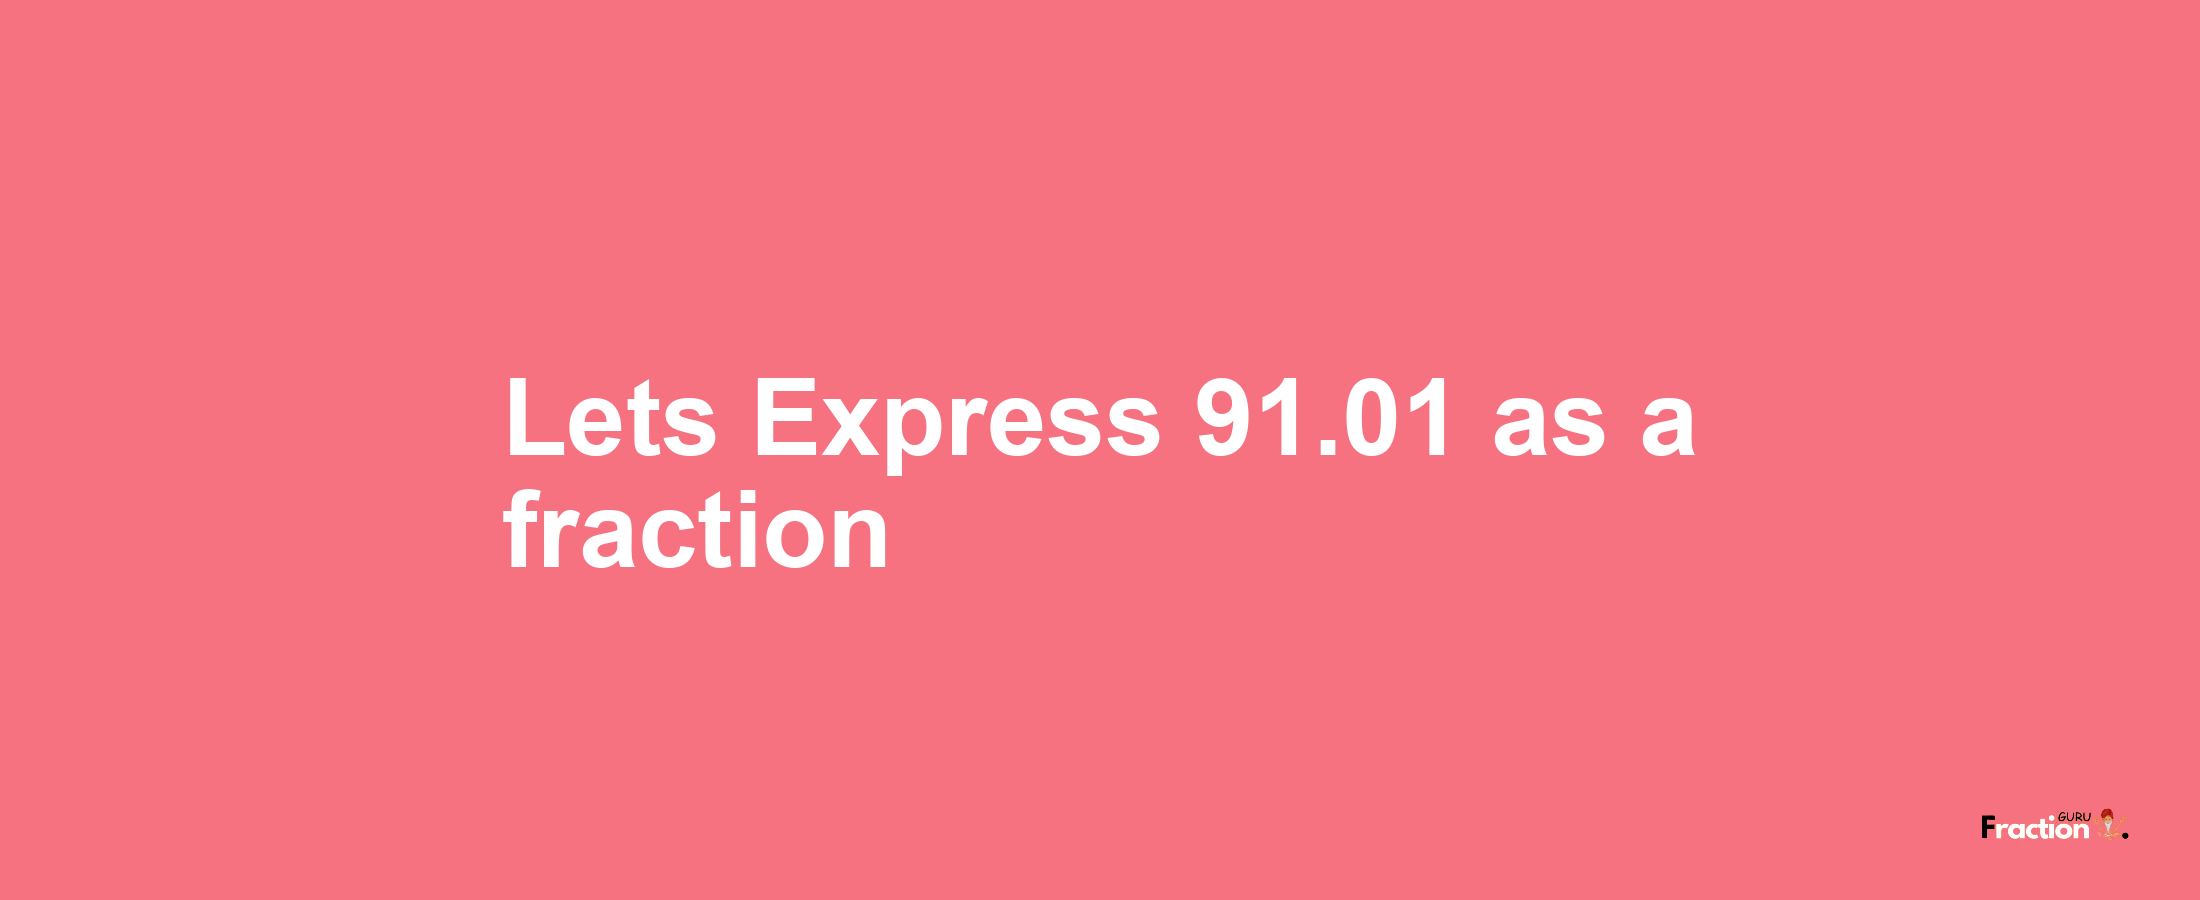 Lets Express 91.01 as afraction